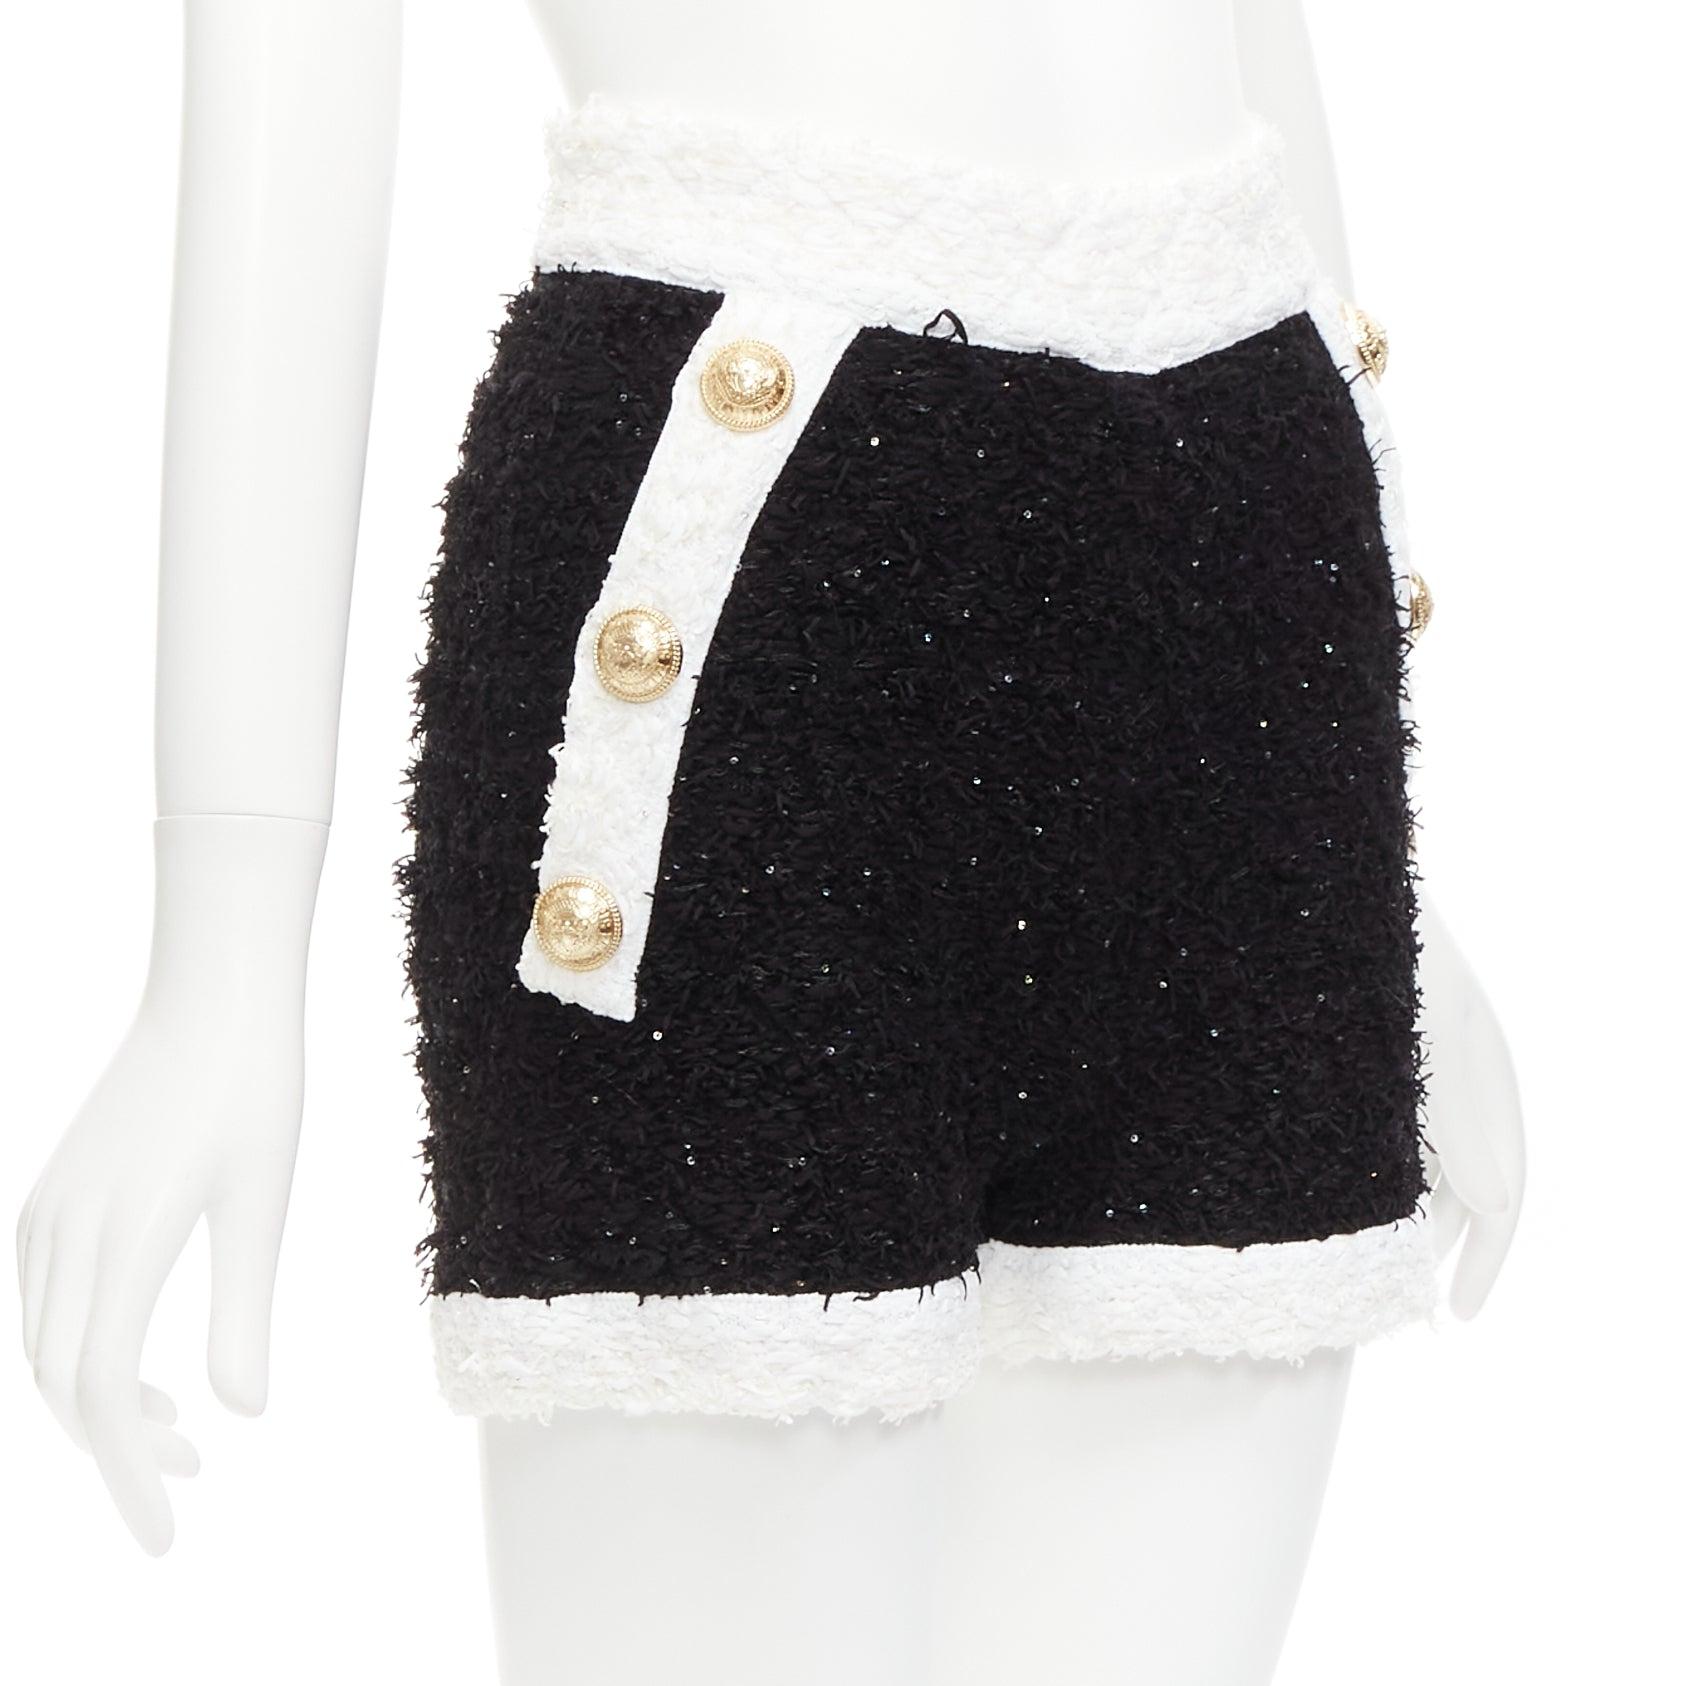 BALMAIN black white sequins tweed gold buttons zip high waisted shorts FR34 XS
Reference: AAWC/A00852
Brand: Balmain
Designer: Olivier Rousteing
Material: Viscose, Blend
Color: Black, White
Pattern: Solid
Closure: Zip
Extra Details: Gold exposed zip